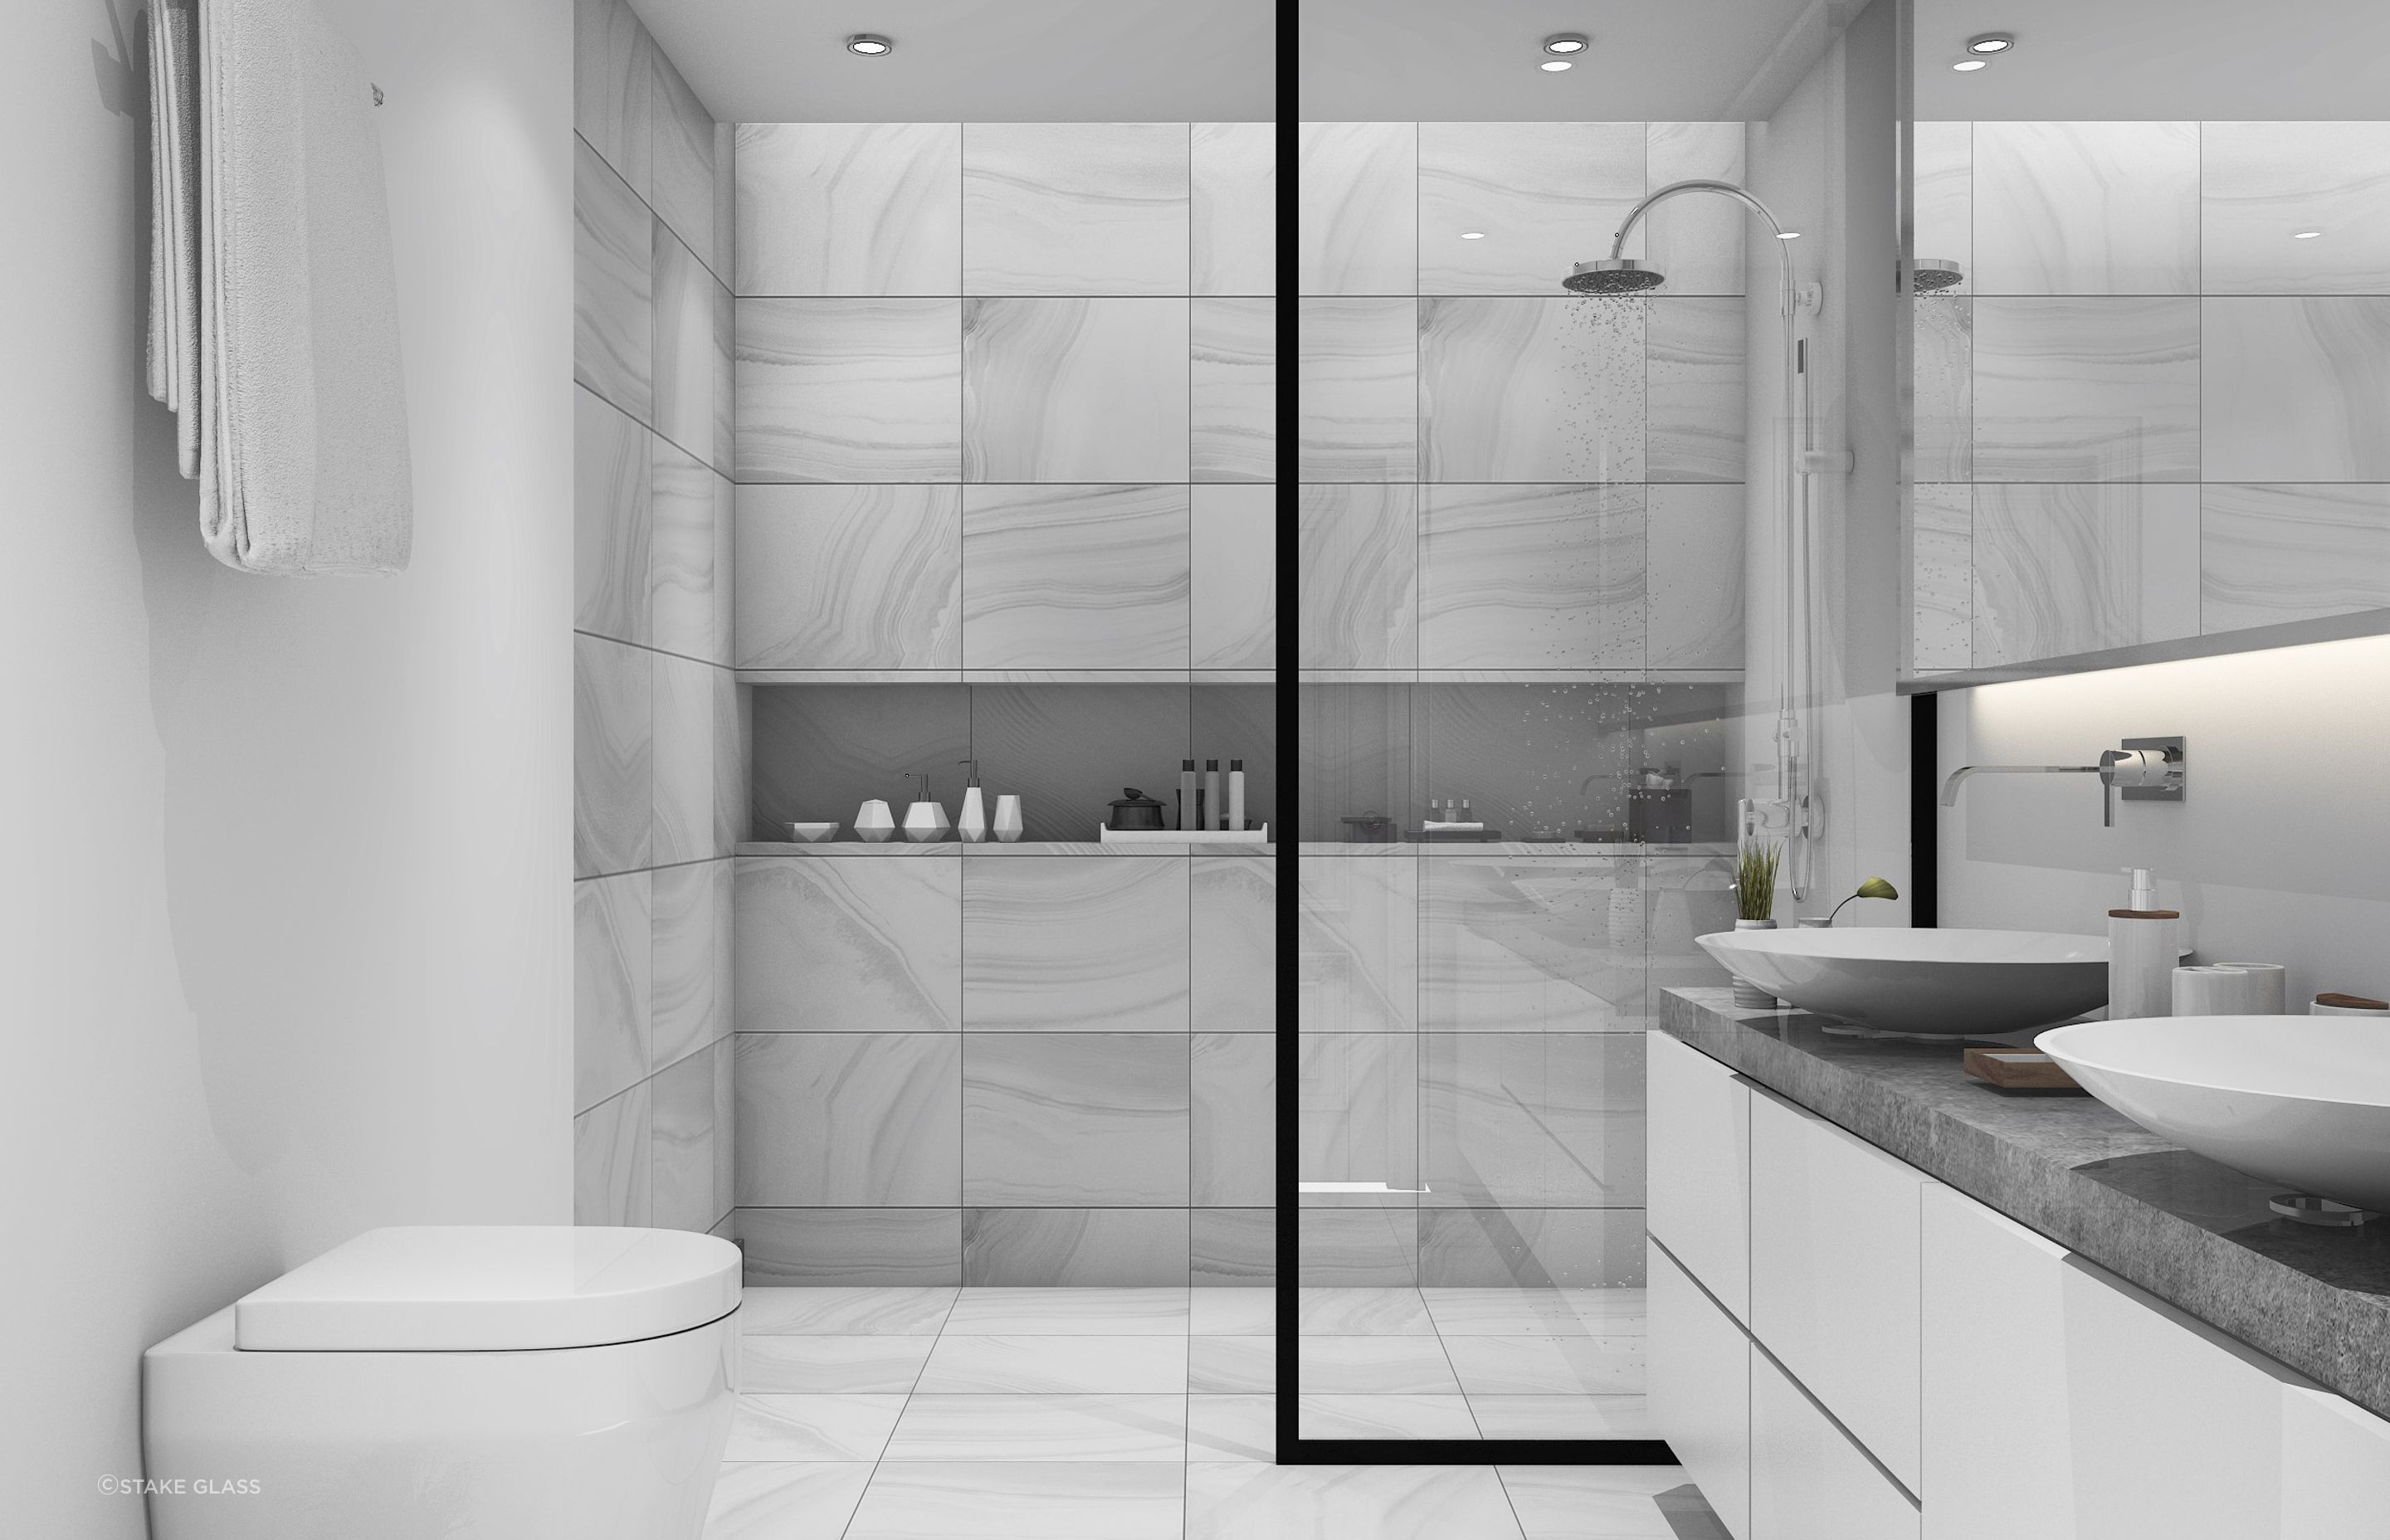 A walk-in shower allows you to seamlessly move into your shower, seen here and complemented by a quality glass panel by Stake Glass.